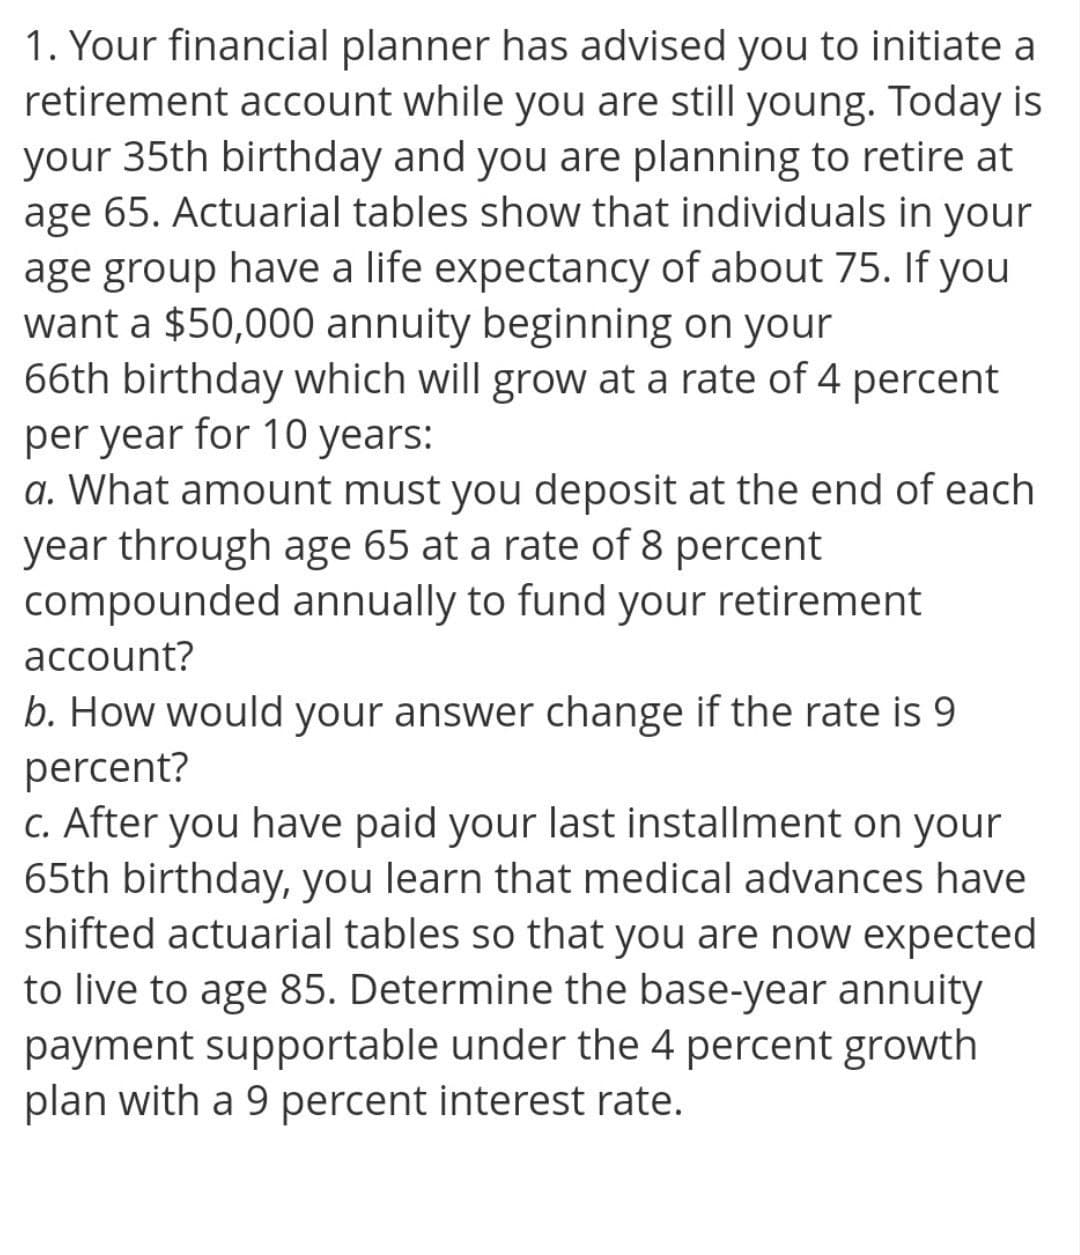 1. Your financial planner has advised you to initiate a
retirement account while you are still young. Today is
your 35th birthday and you are planning to retire at
age 65. Actuarial tables show that individuals in your
age group have a life expectancy of about 75. If you
want a $50,000 annuity beginning on your
66th birthday which will grow at a rate of 4 percent
per year for 10 years:
a. What amount must you deposit at the end of each
year through age 65 at a rate of 8 percent
compounded annually to fund your retirement
account?
b. How would your answer change if the rate is 9
percent?
c. After you have paid your last installment on your
65th birthday, you learn that medical advances have
shifted actuarial tables so that you are now expected
to live to age 85. Determine the base-year annuity
payment supportable under the 4 percent growth
plan with a 9 percent interest rate.
